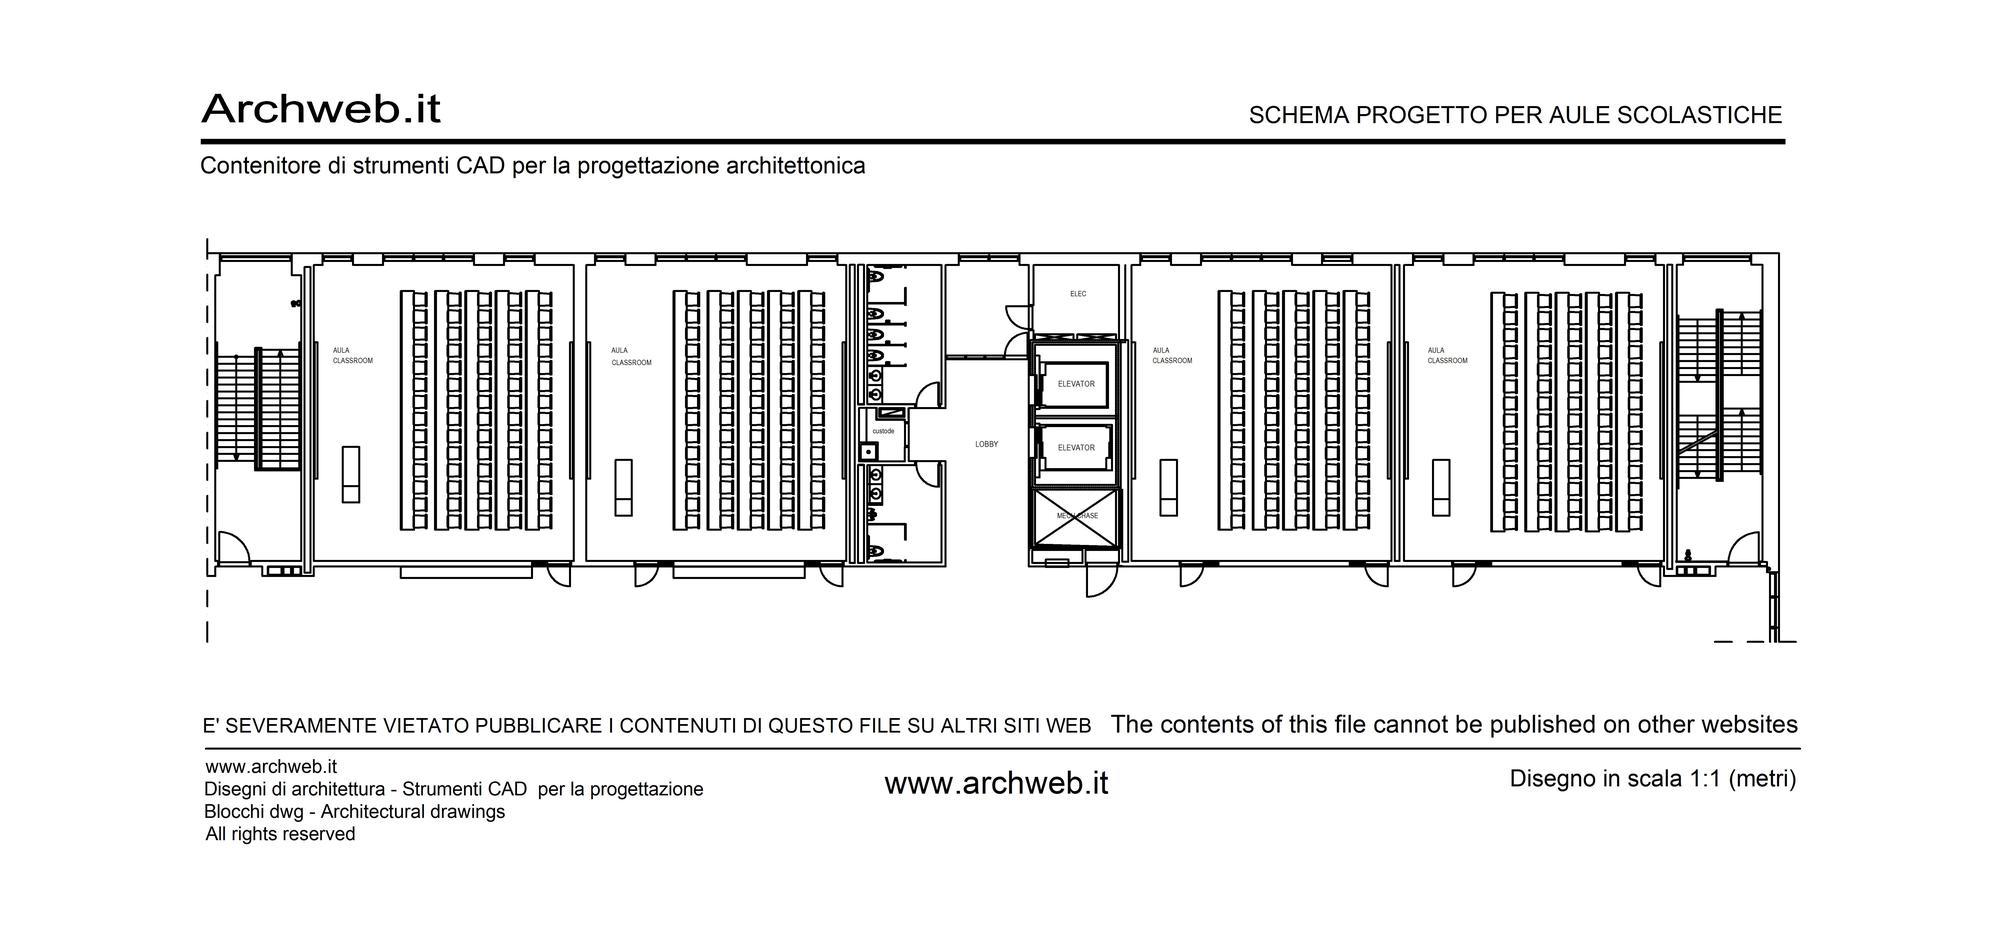 Classrooms for school - 1:100 scale dwg drawing - Archweb